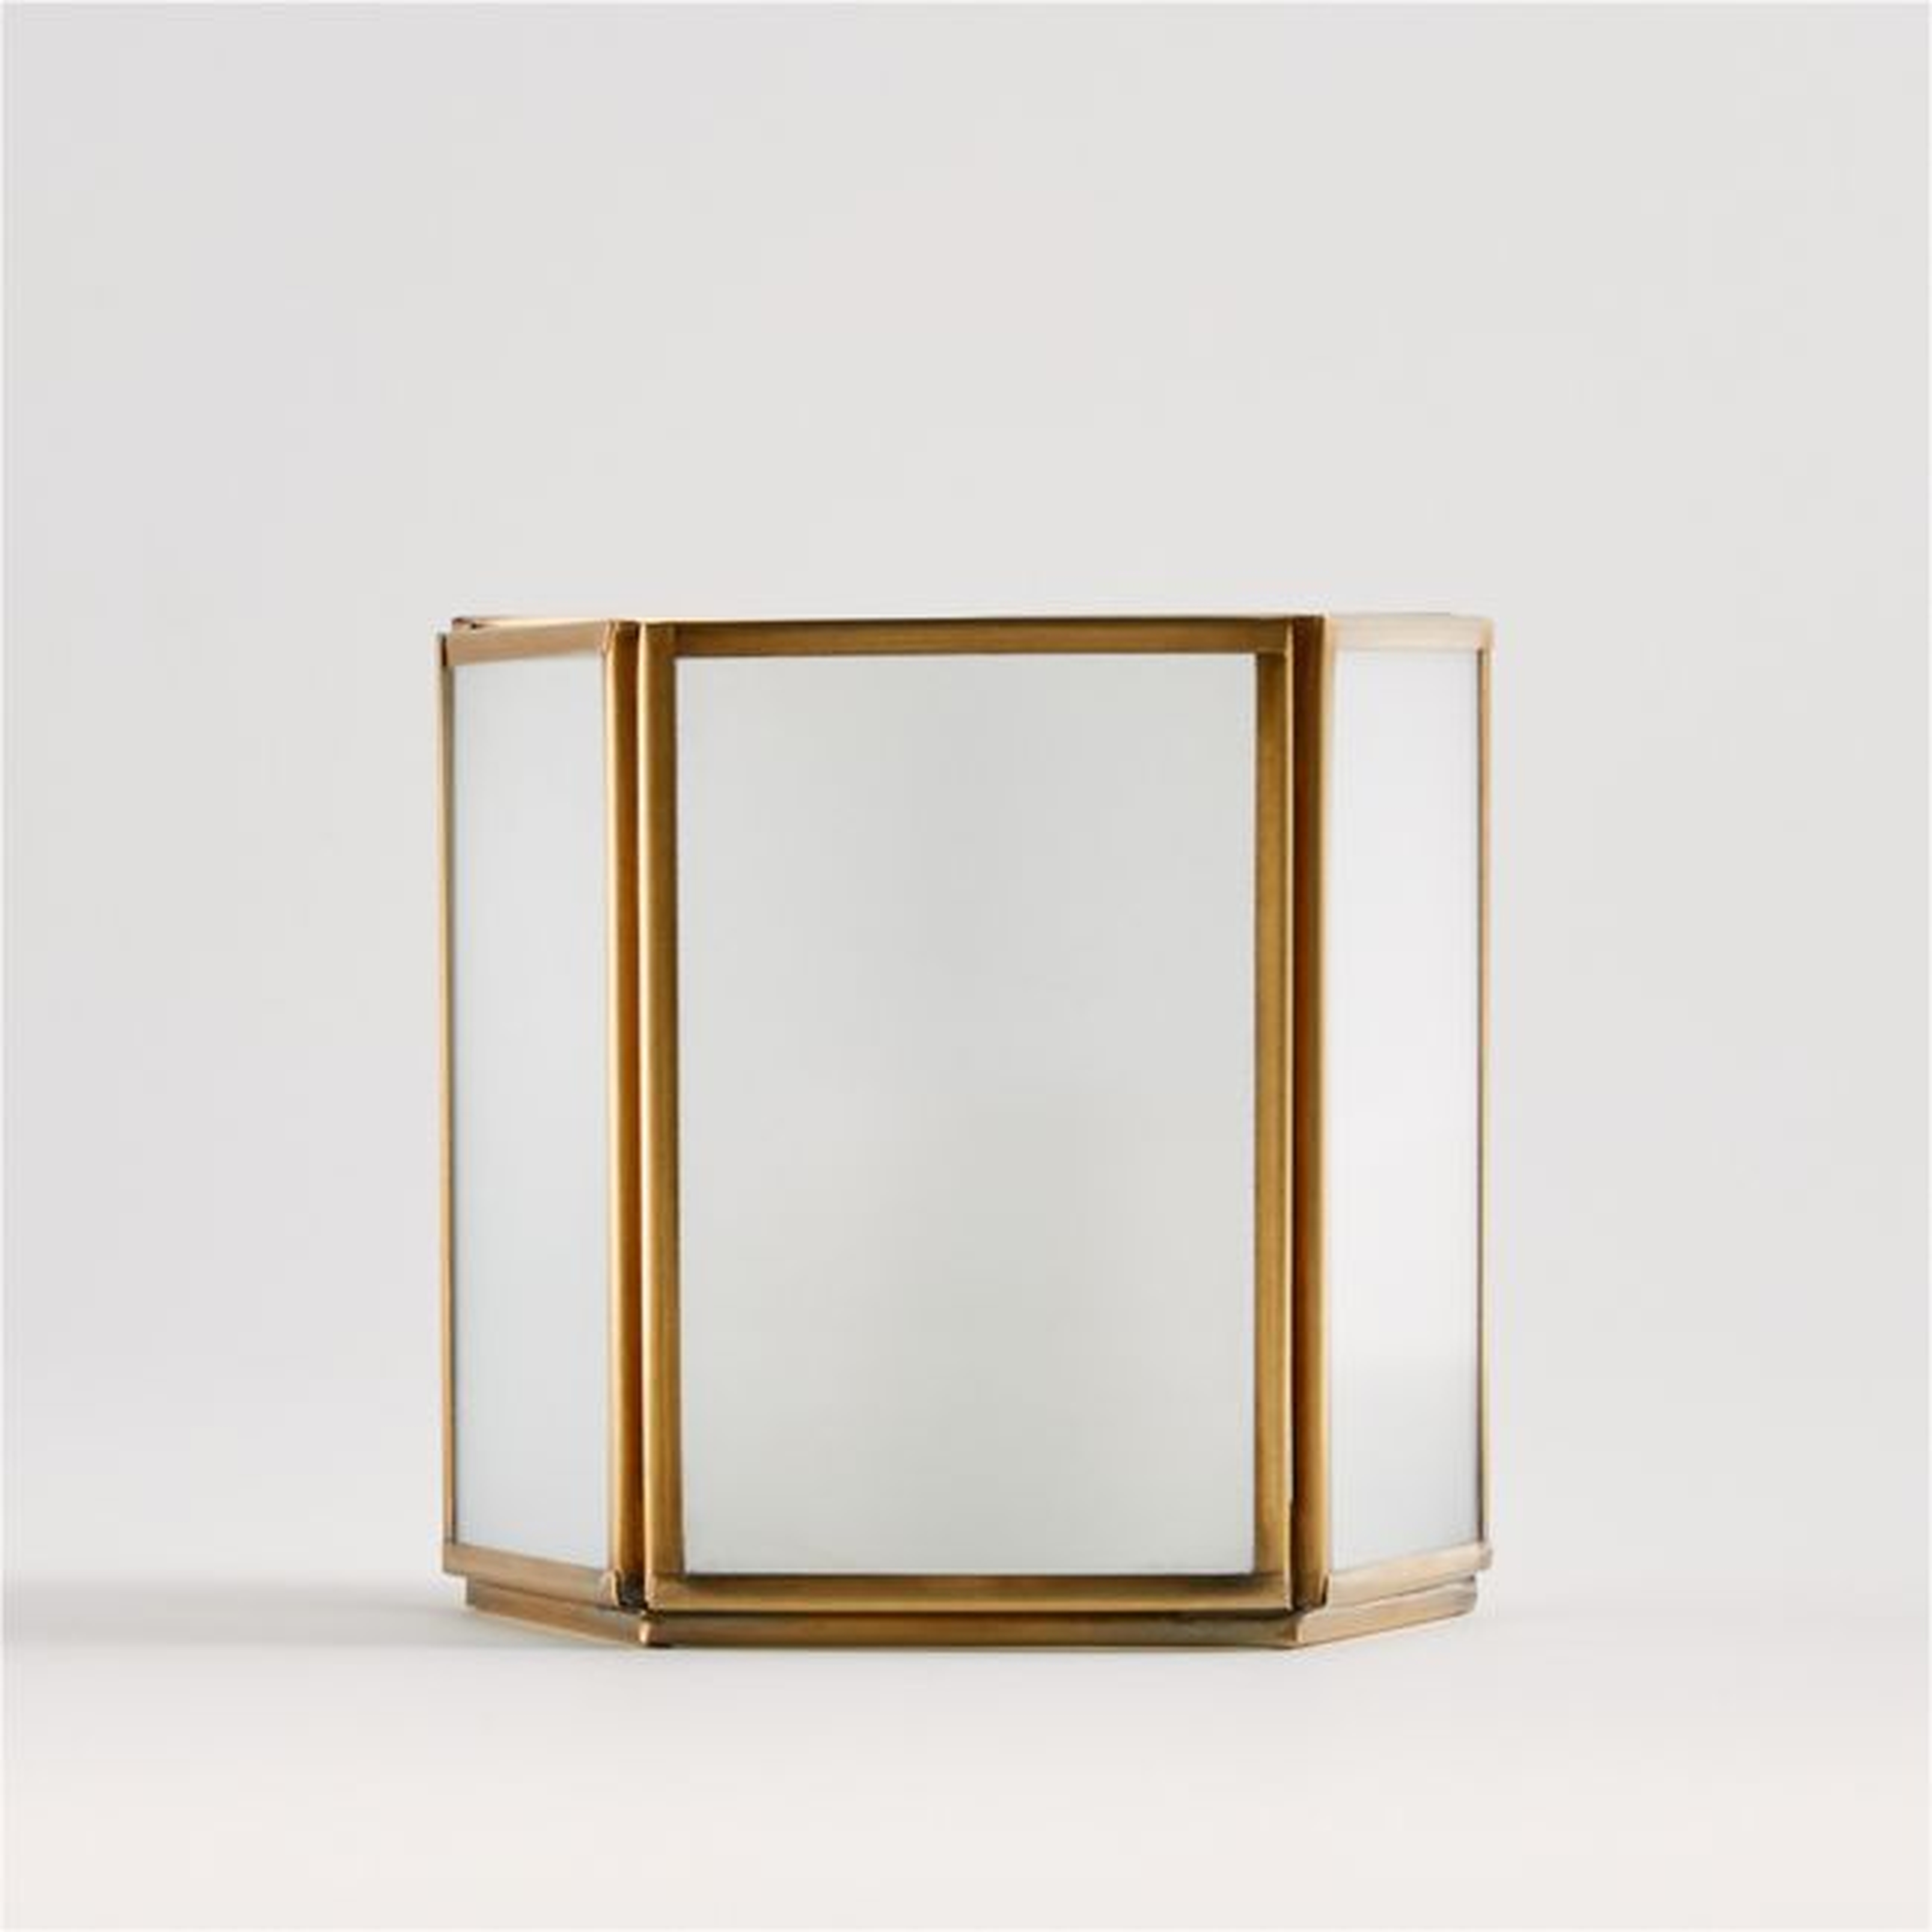 Andelyn Small Frosted Glass Hurricane - Crate and Barrel